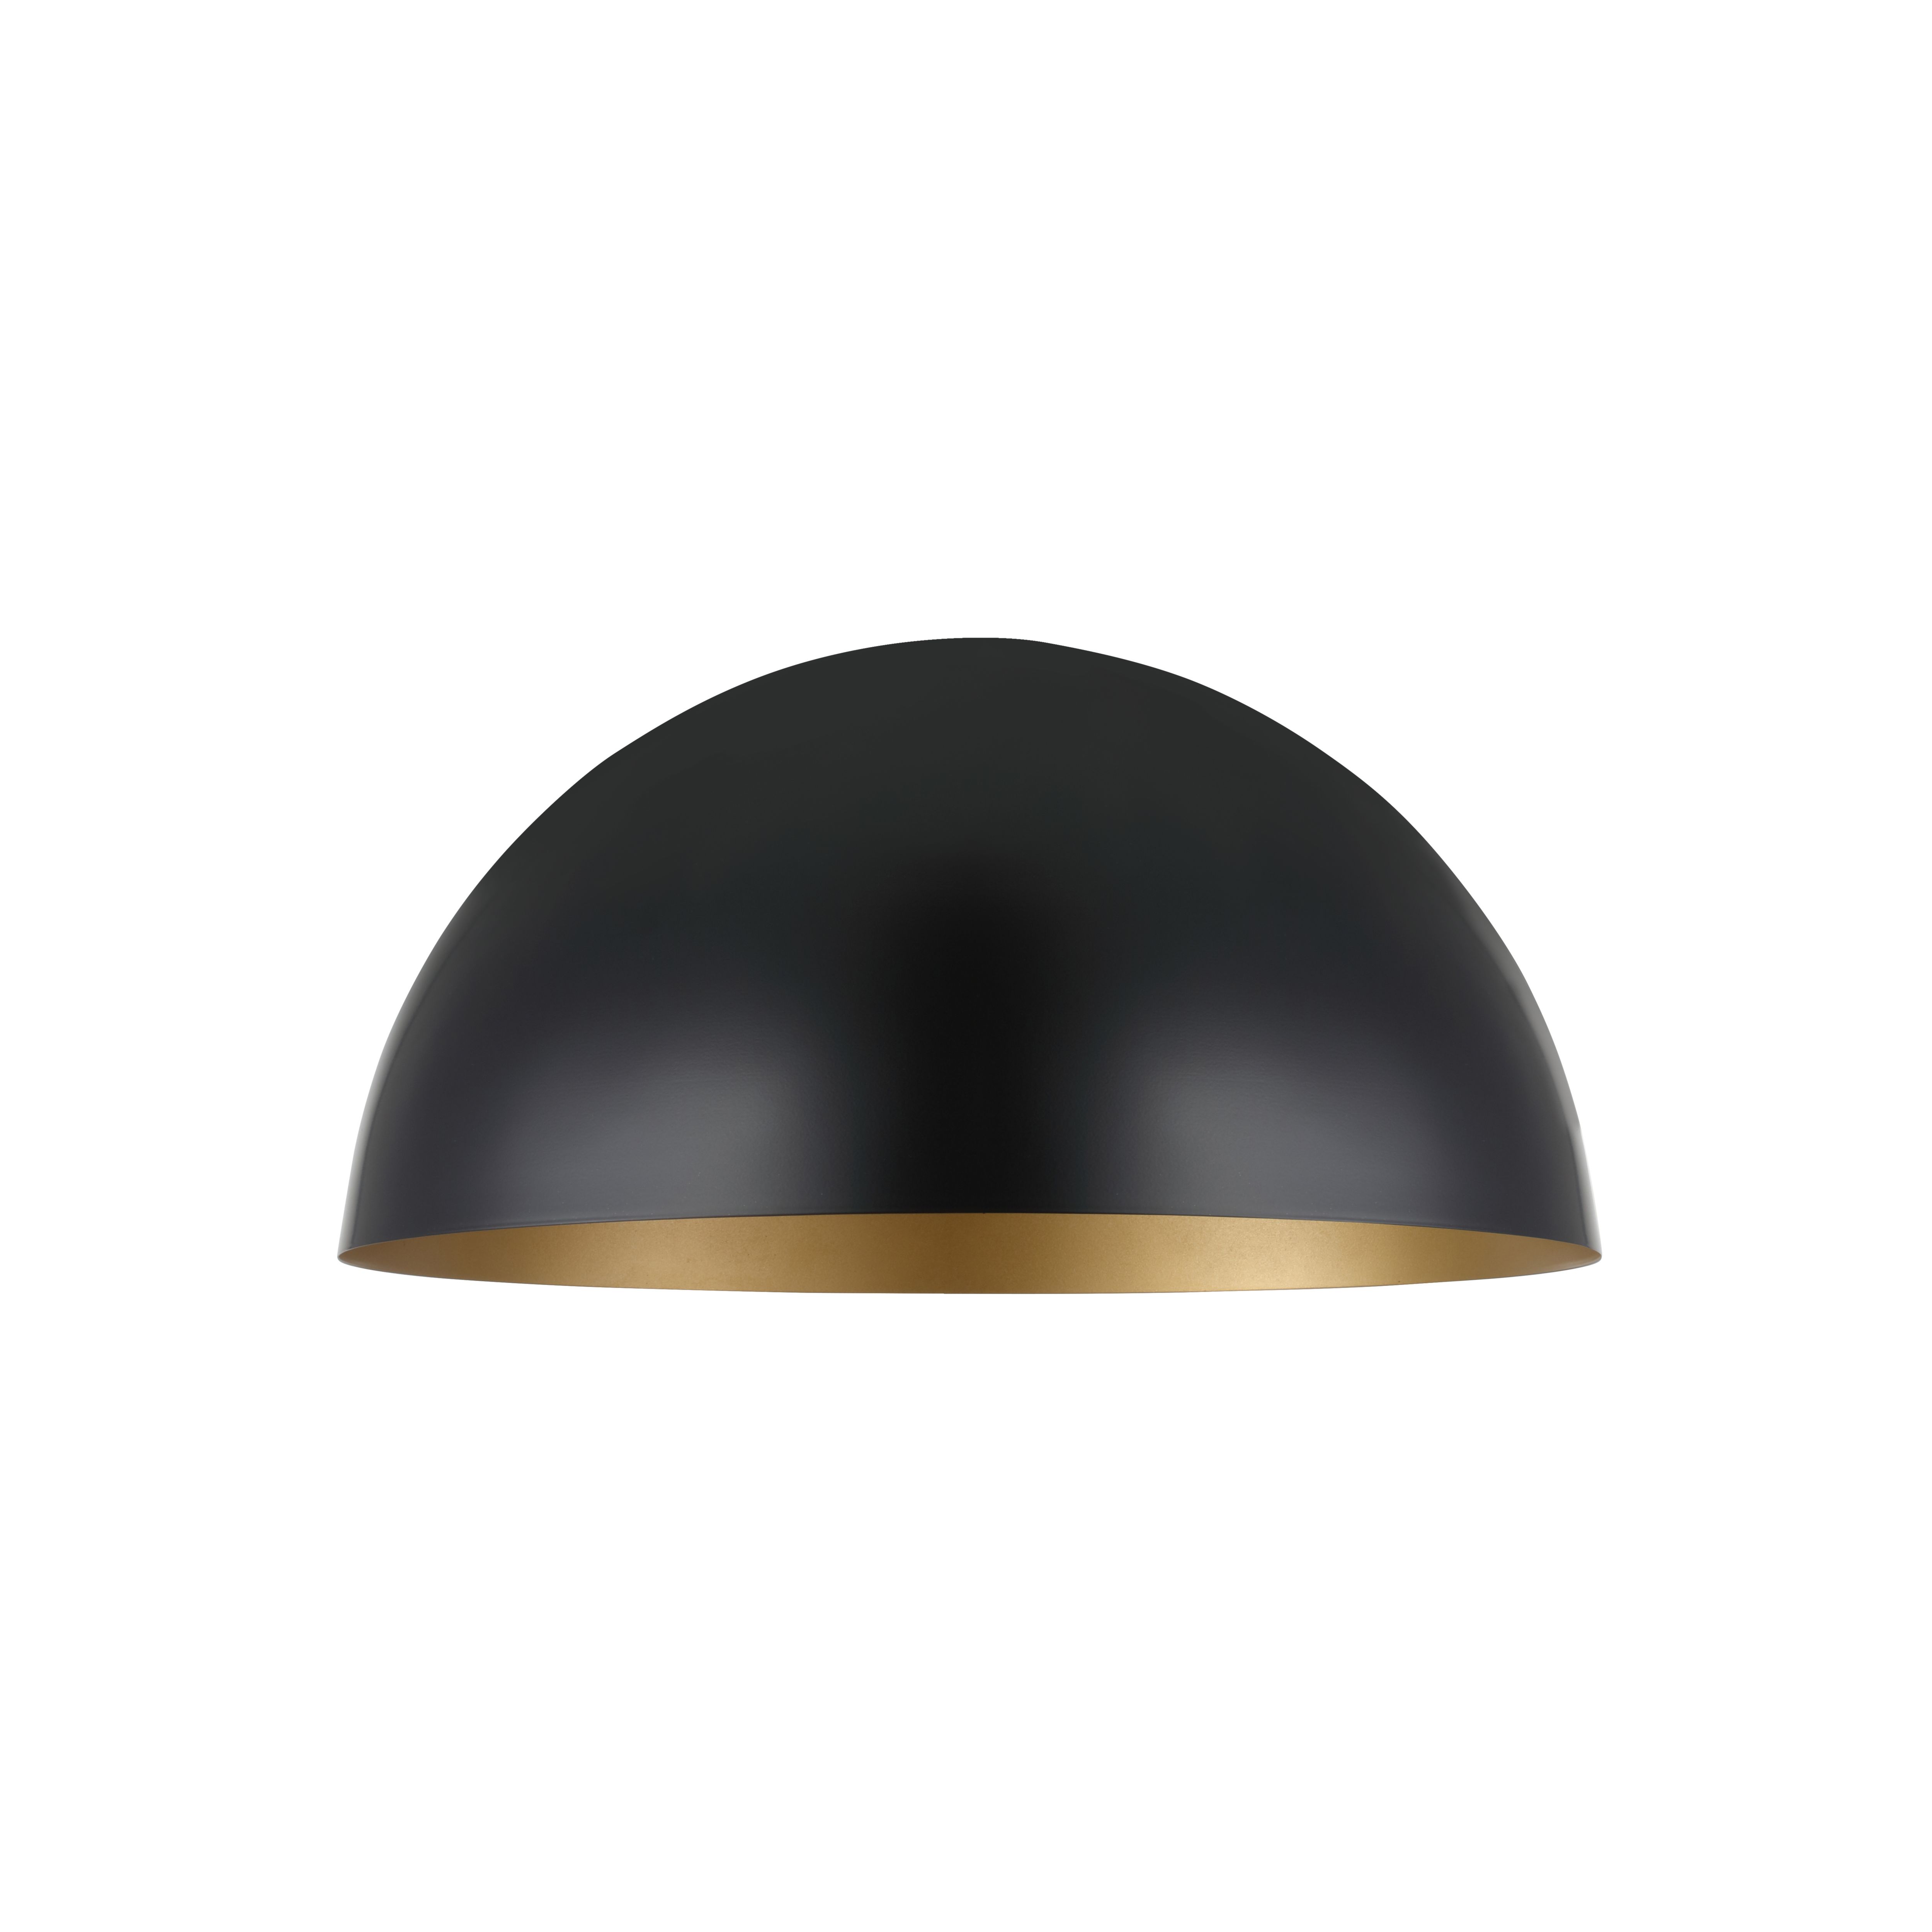 GoodHome Songor Black Gold effect Dome Light shade (D)38cm